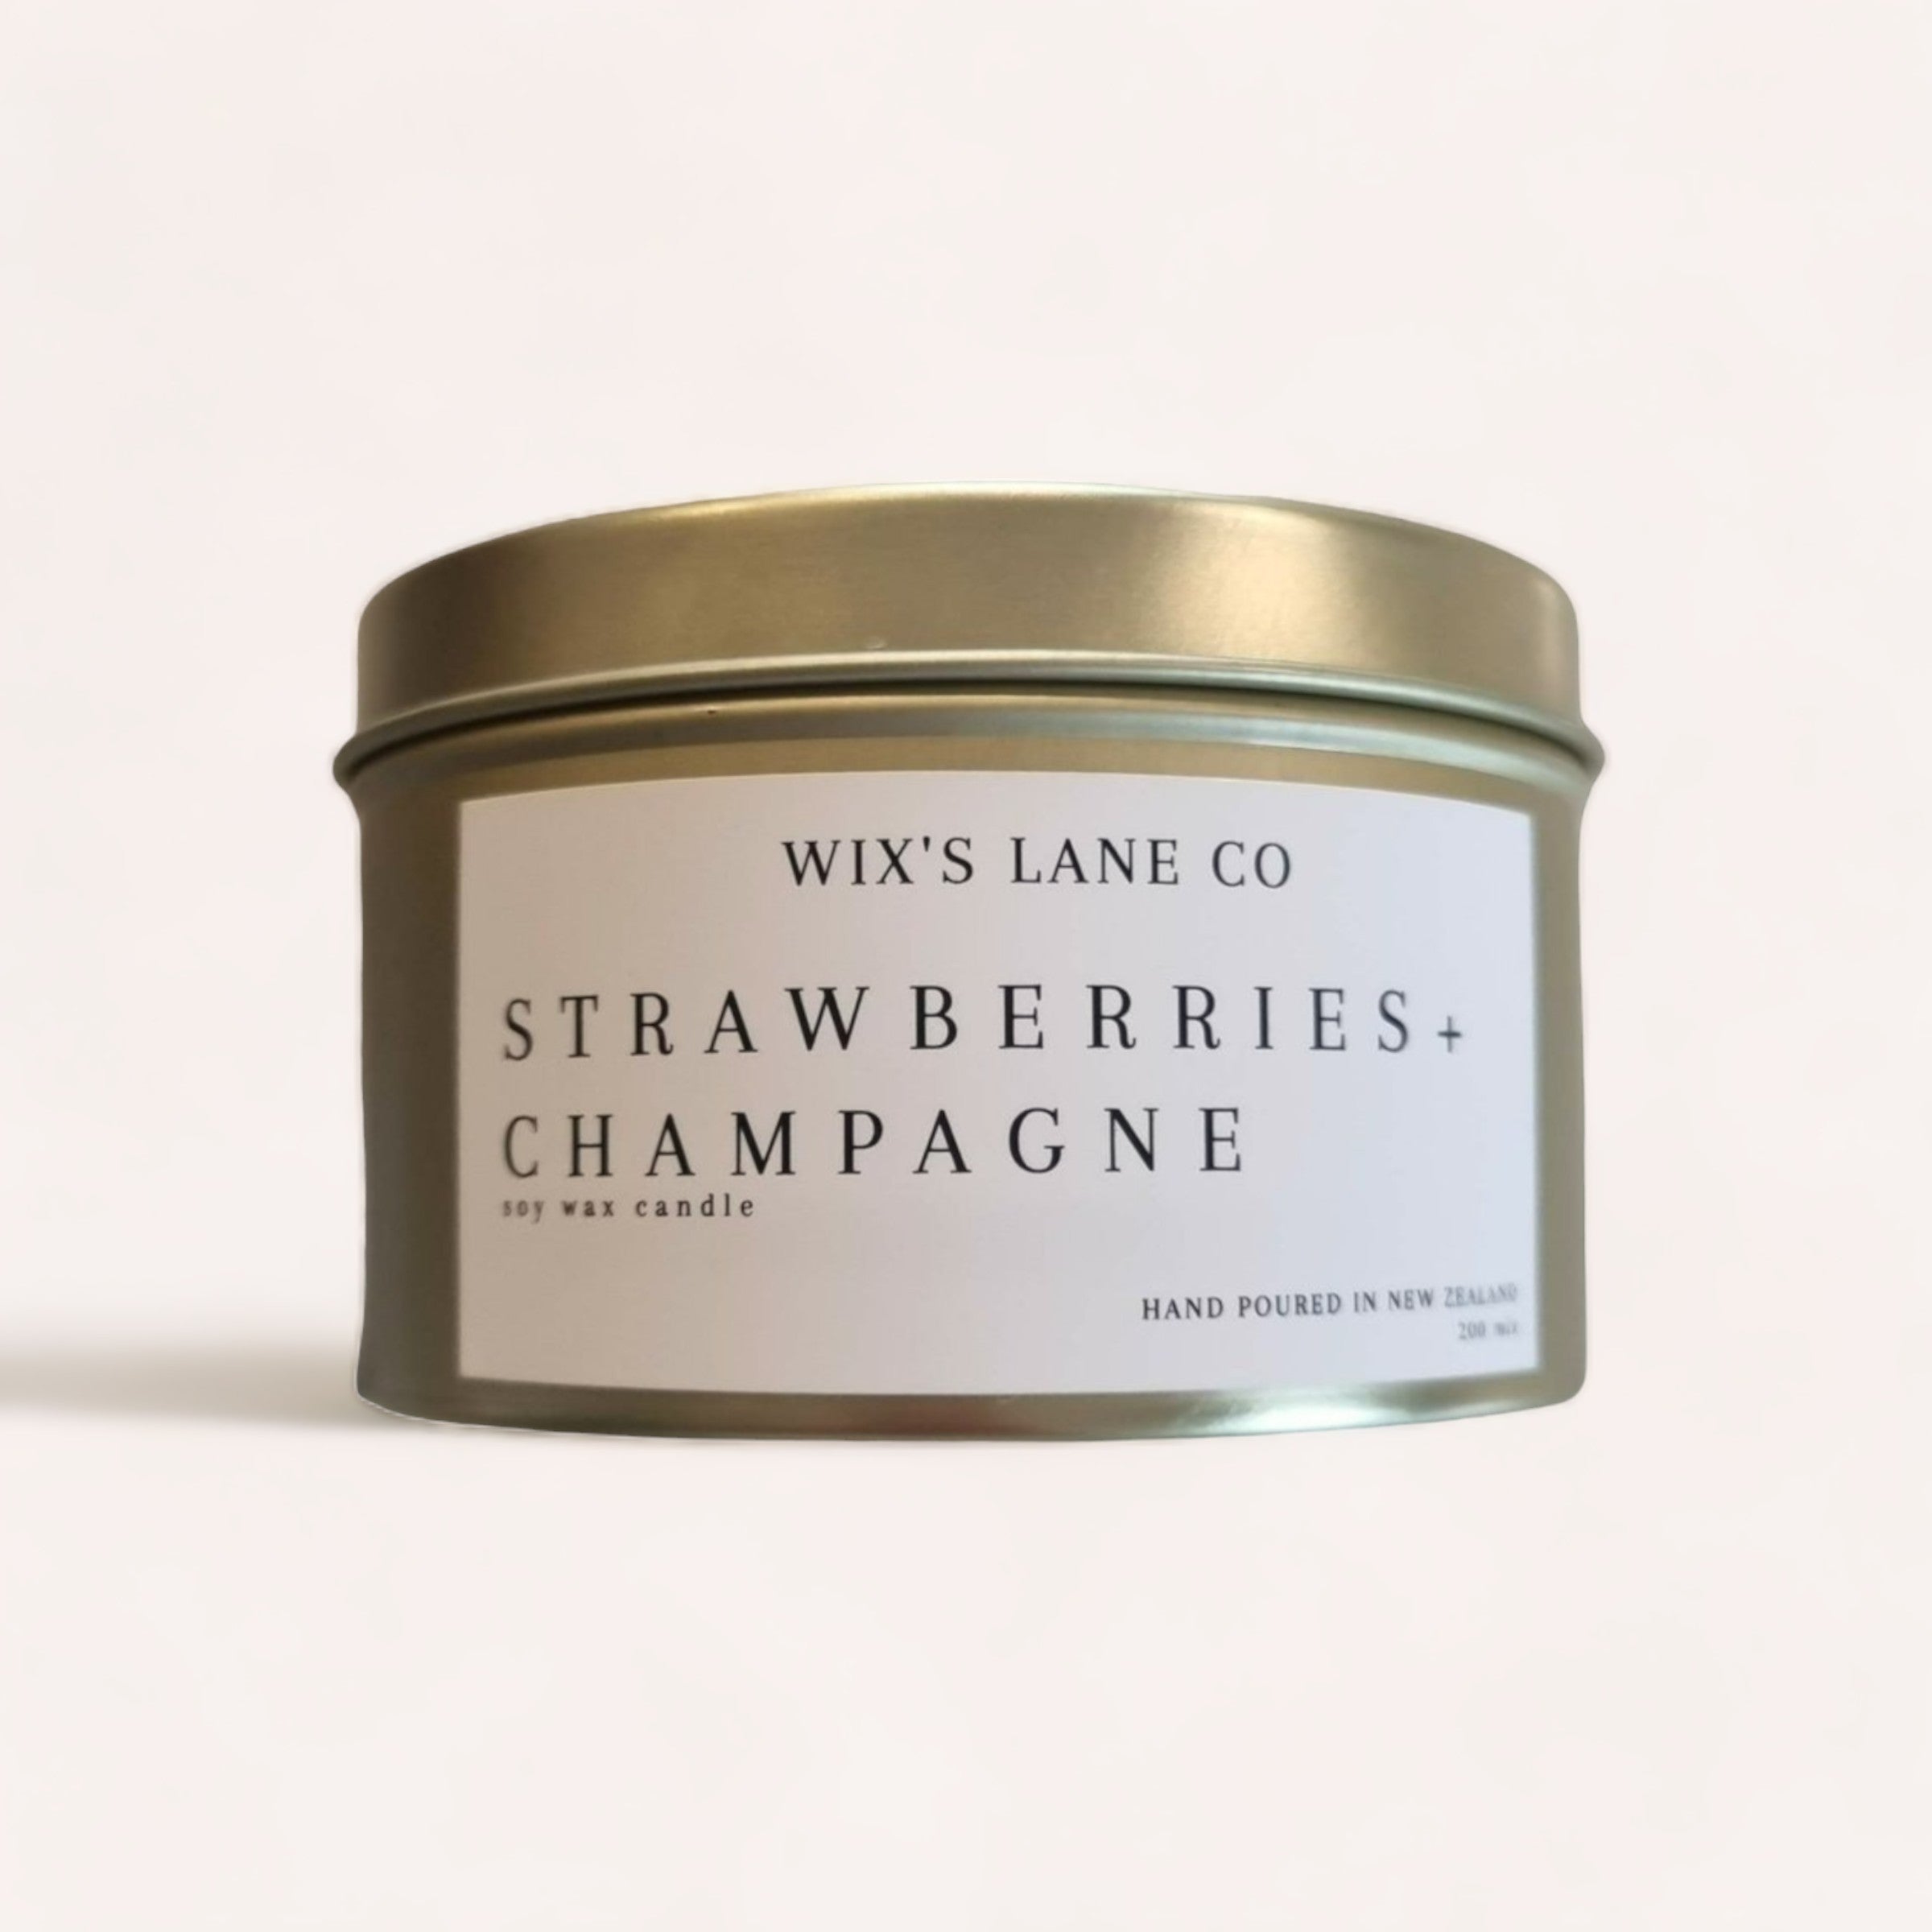 strawberries & champagne soy wax candle by wix's lane co